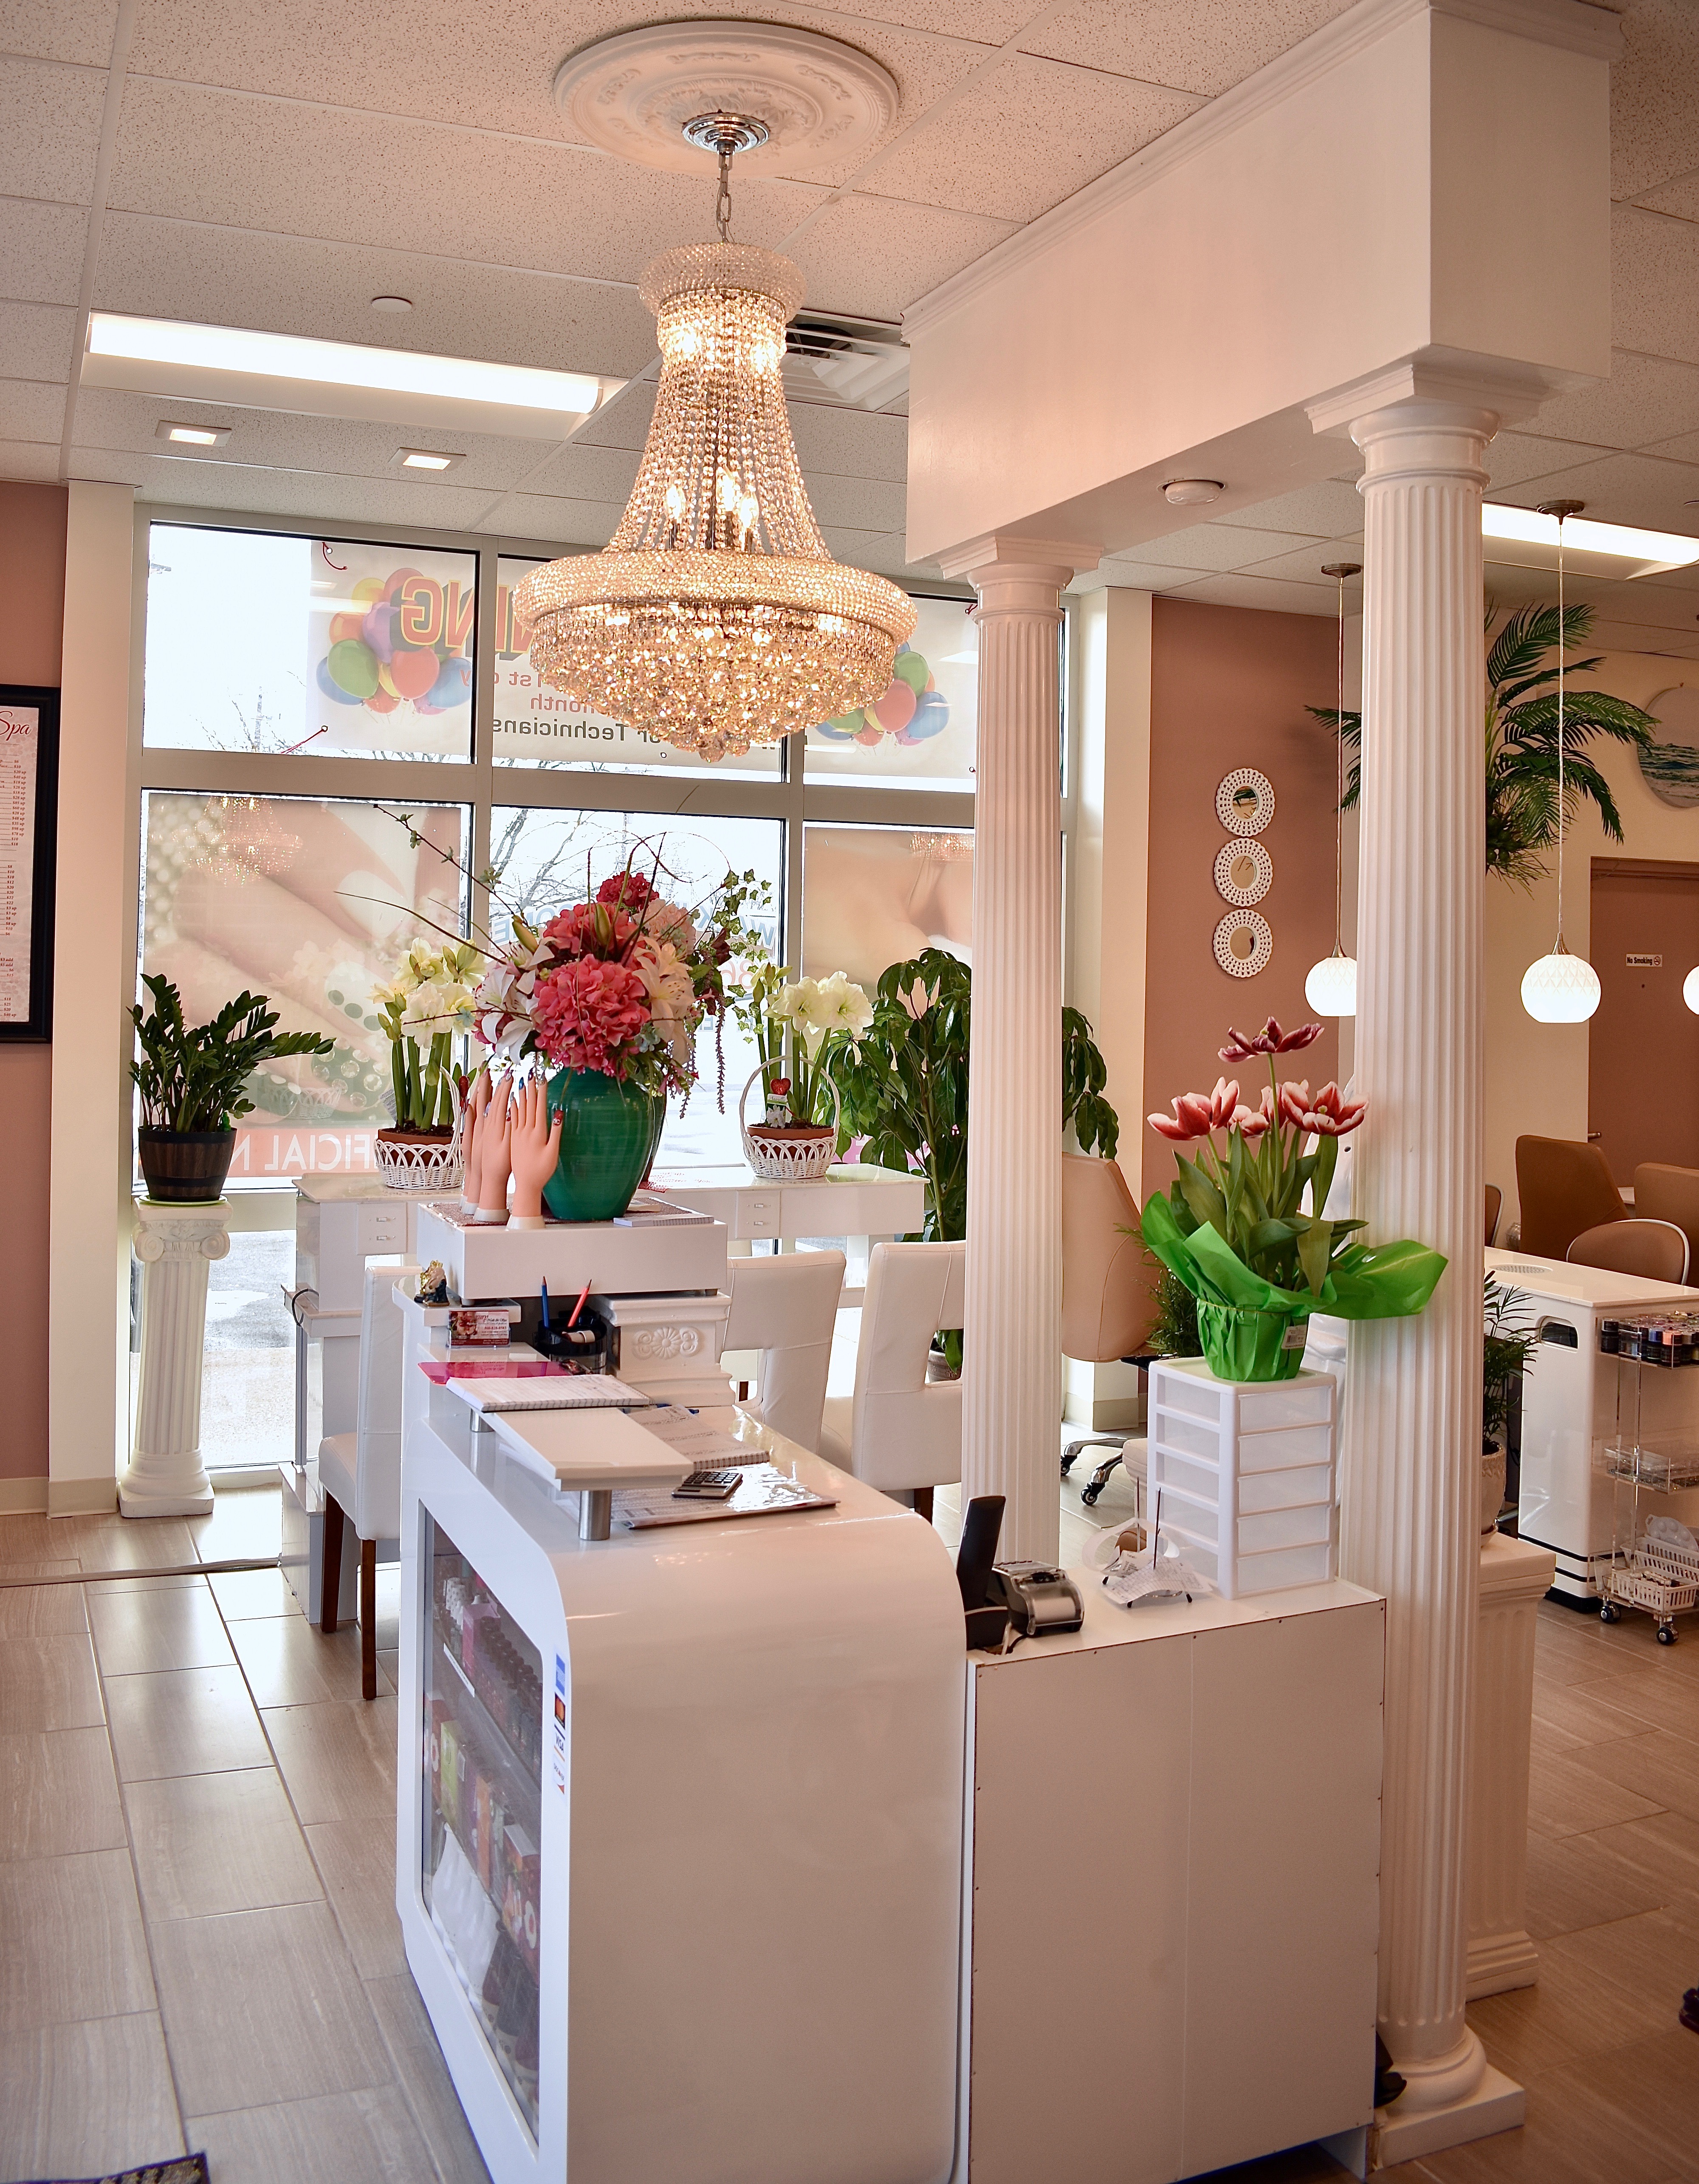 Pegarch Ct Architect Commercial Residential Design Nail Salon Spa